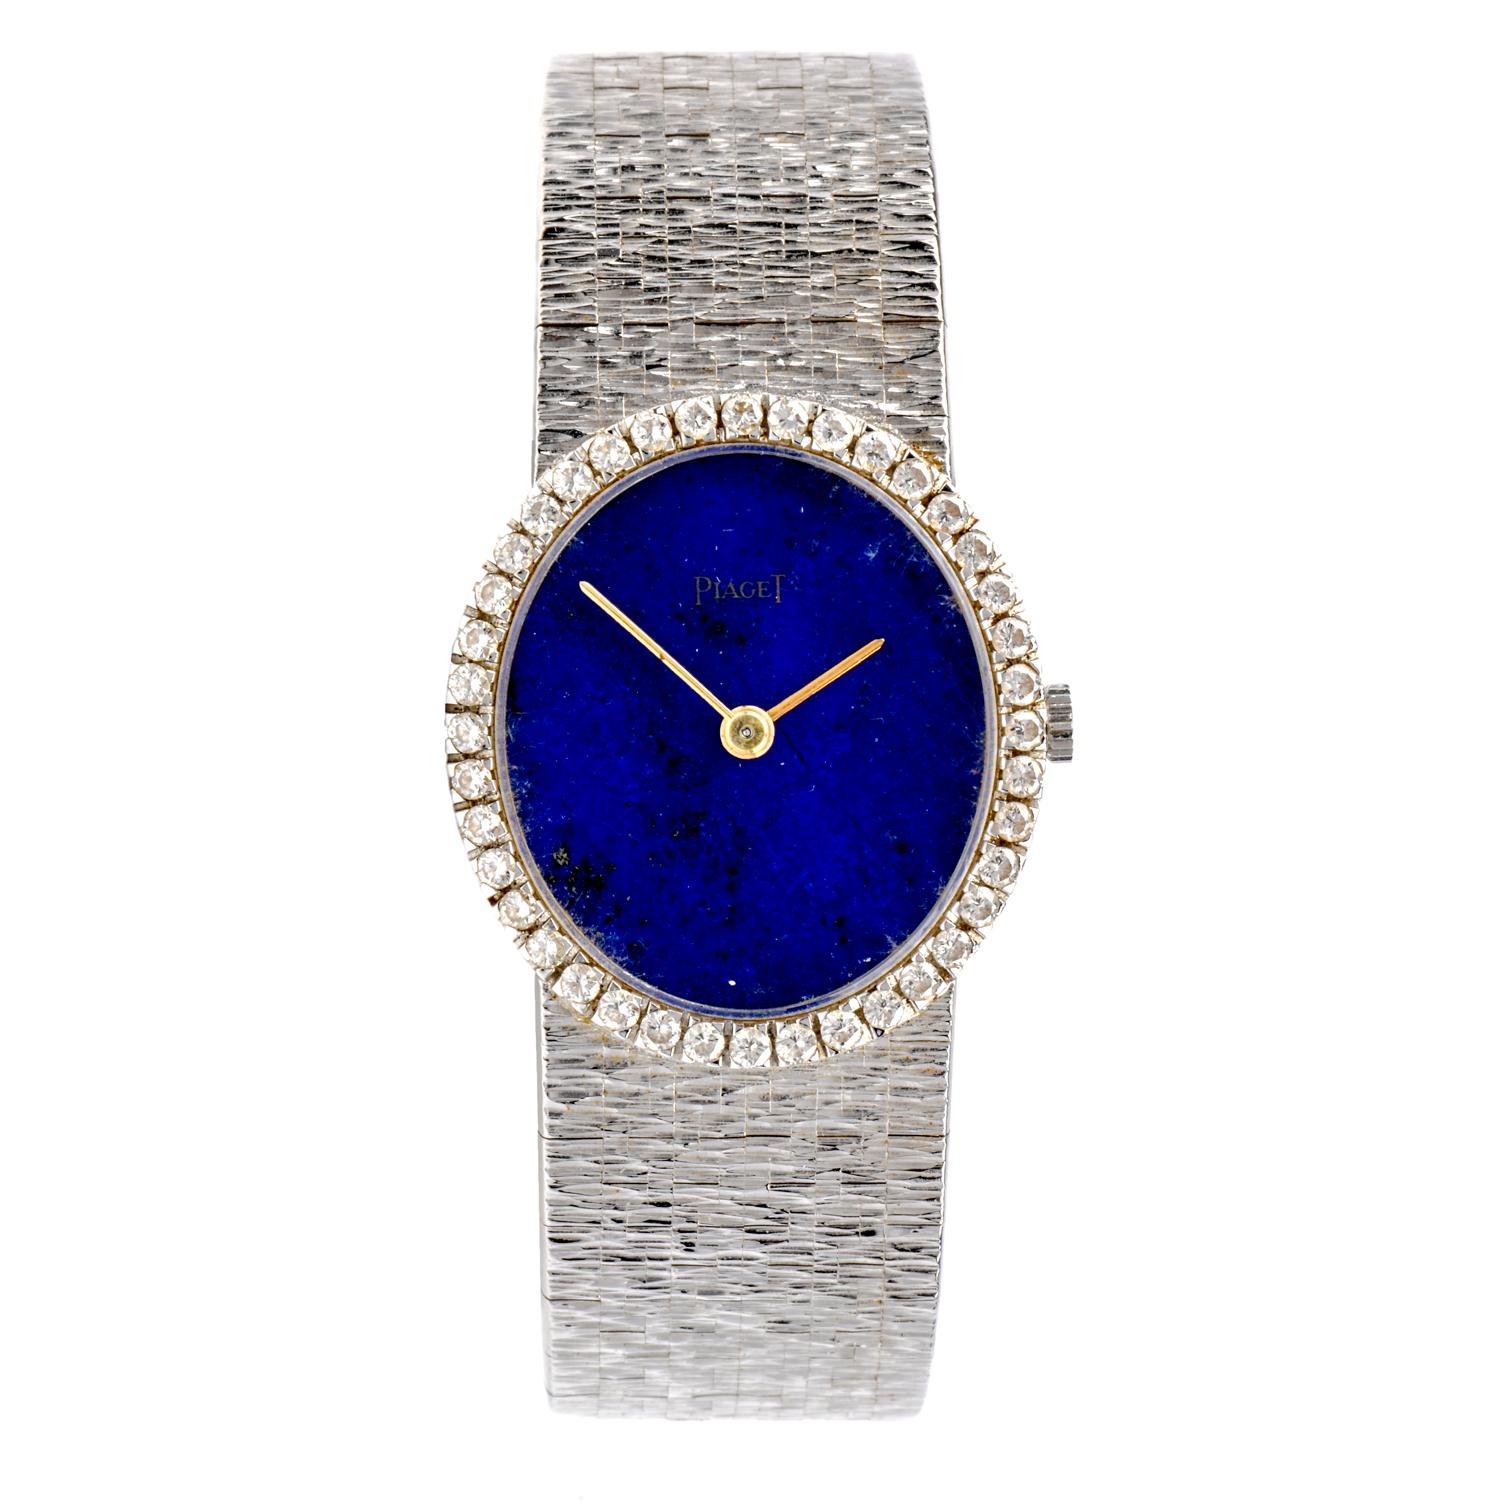 Circa Late 1960’s designer Piaget ladies watch crafted in solid 18-karat white gold. 

Embellished with factory set diamond. Sapphire Crystal, Genuine lapis Dial, 24mm case( without Crown) and 36 factory set round diamonds approx. 0.75 carats, E-F